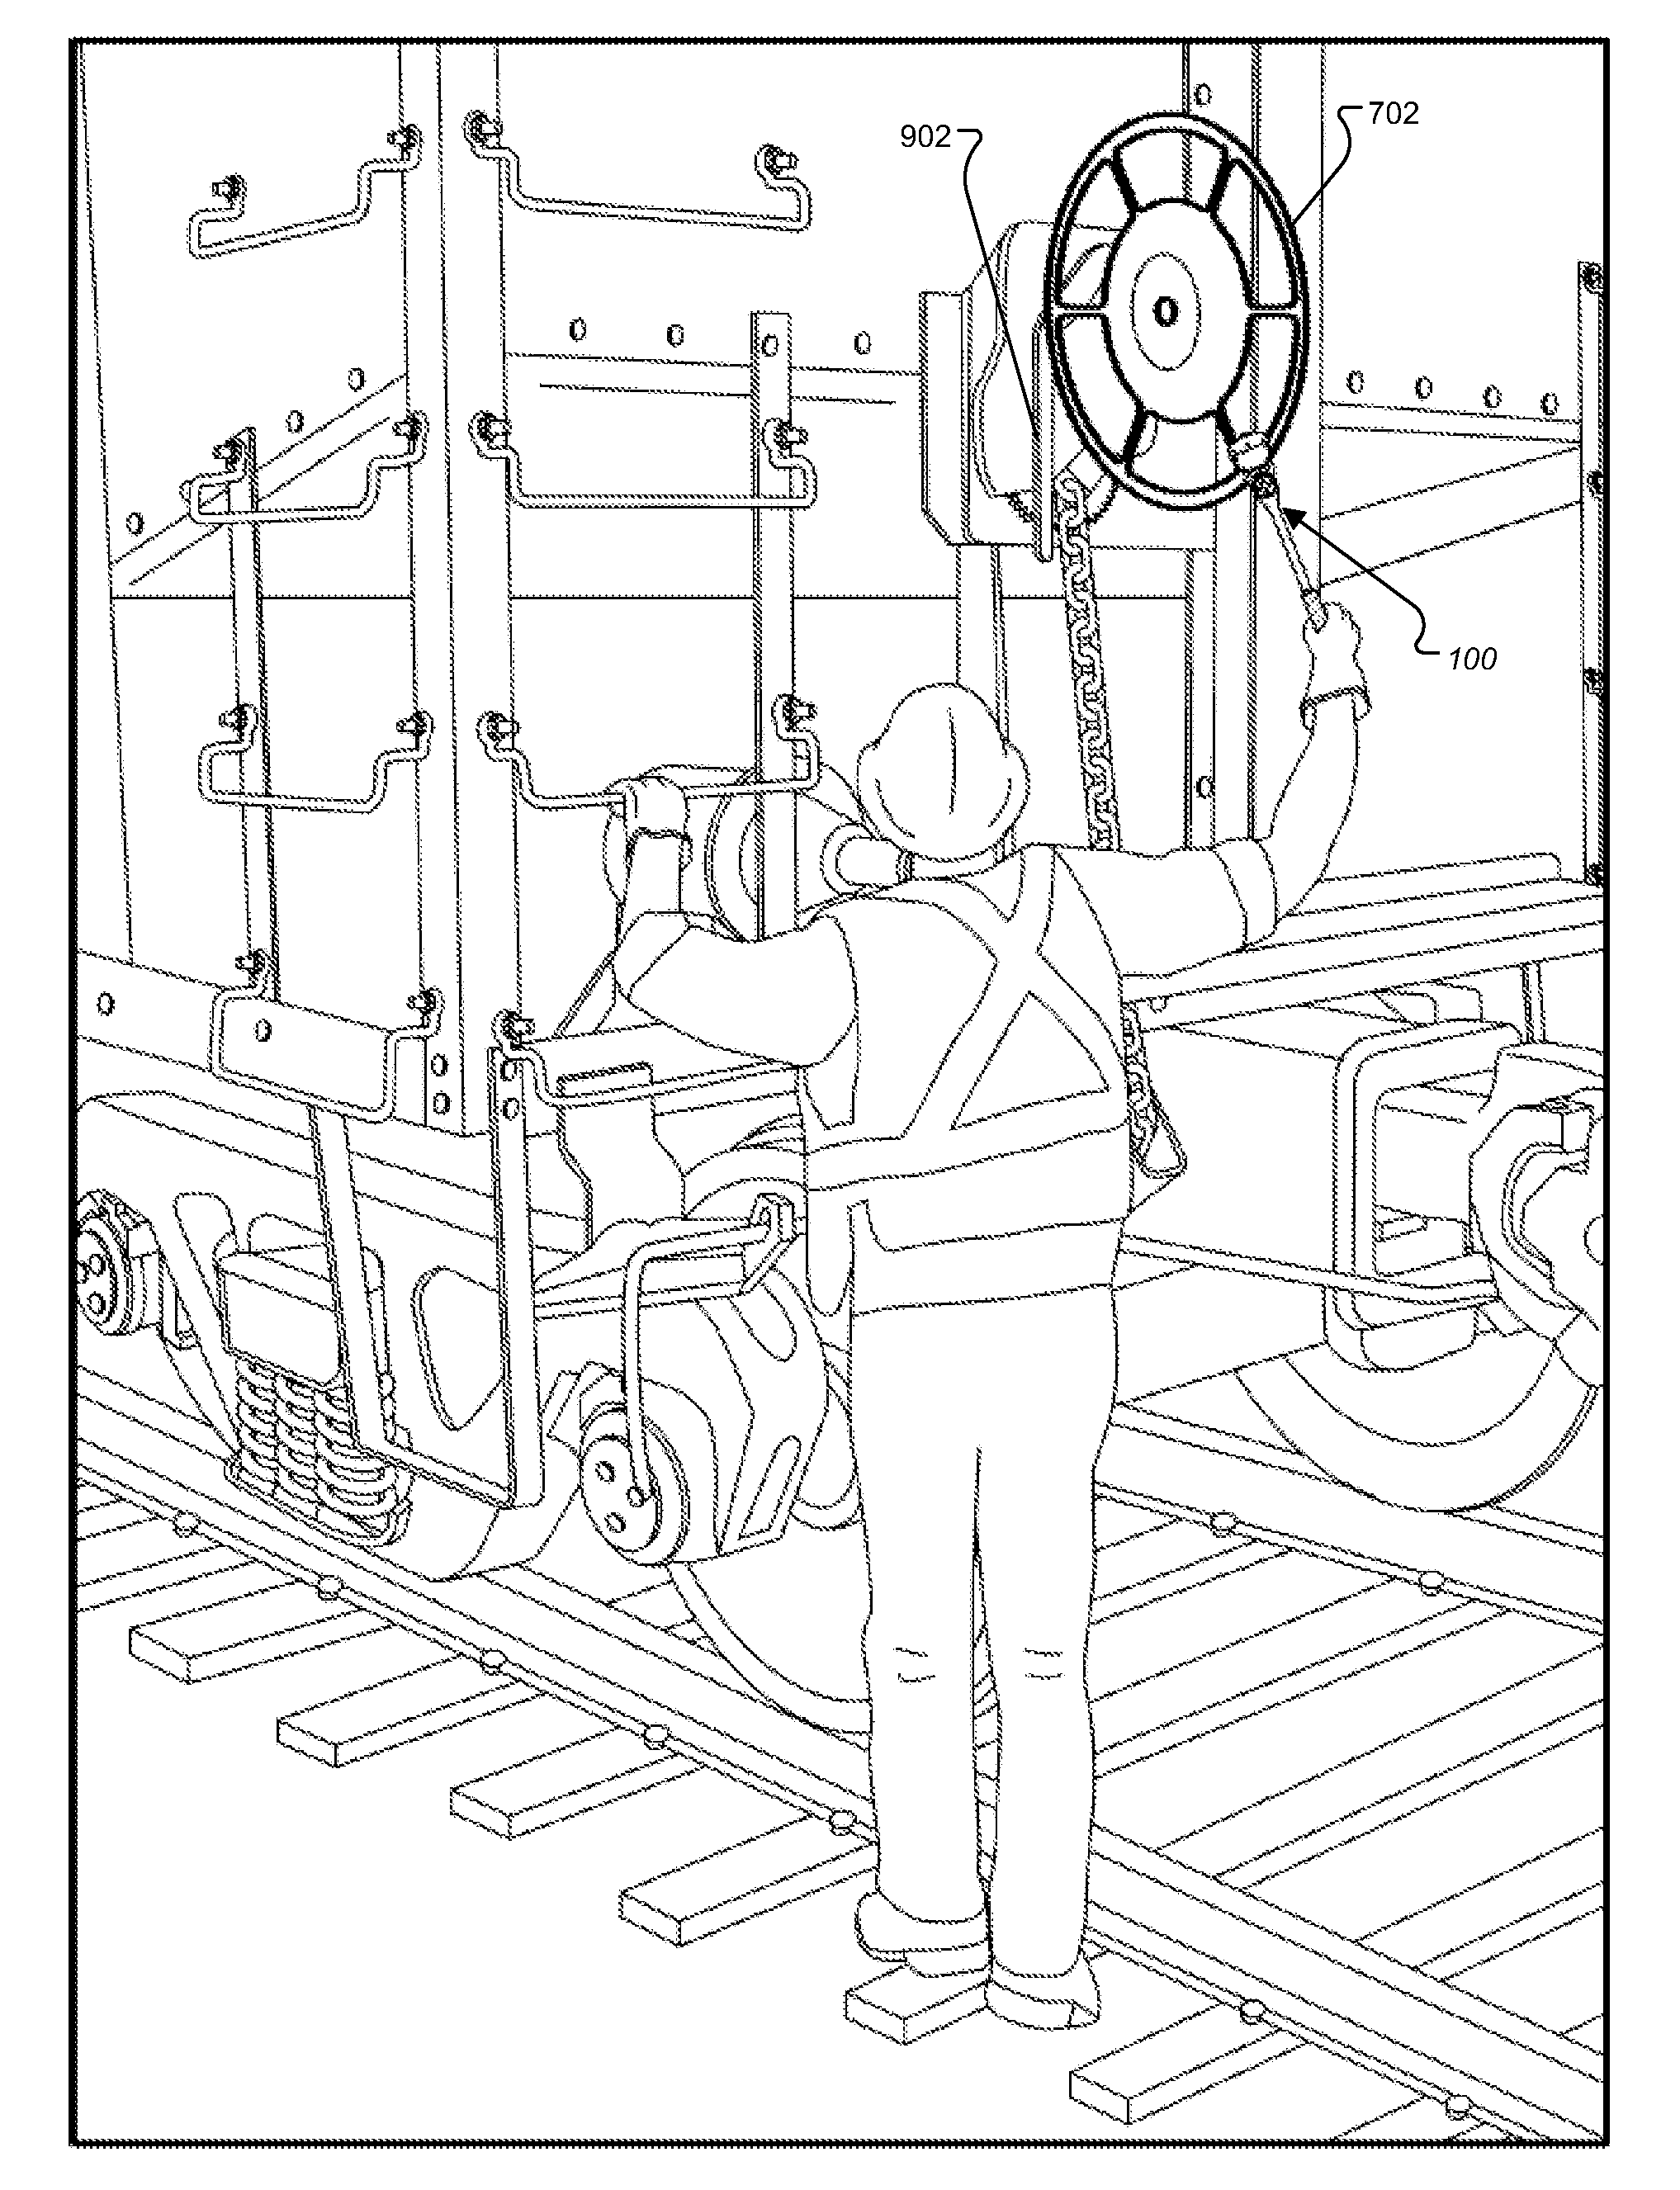 Extension tool for operating handwheels